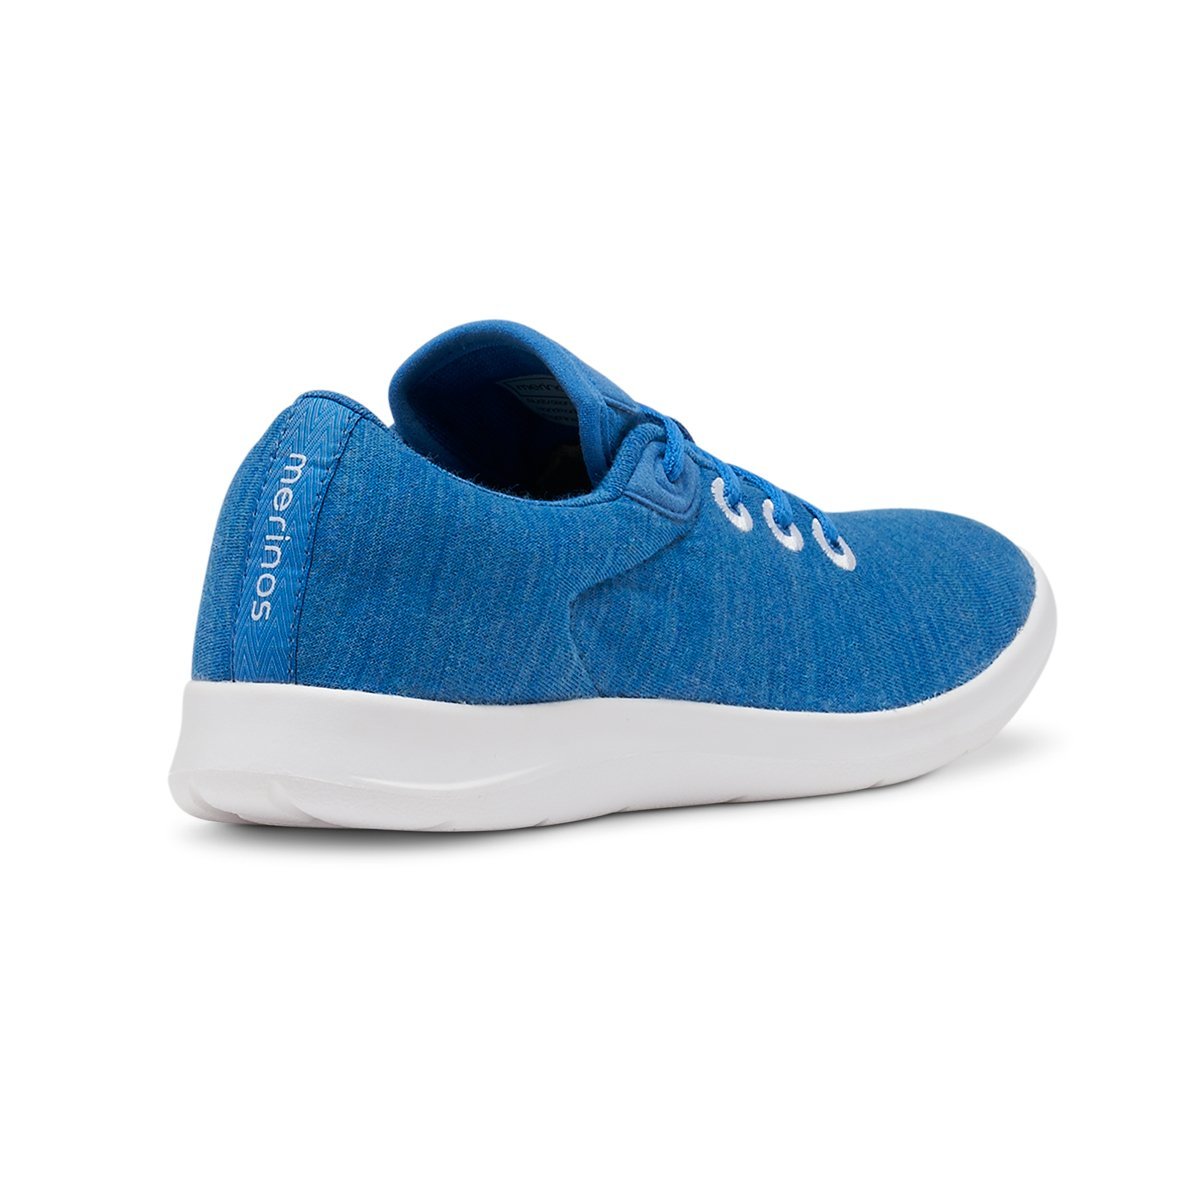 Women's Lace-Ups Bright Blue - Special Offer